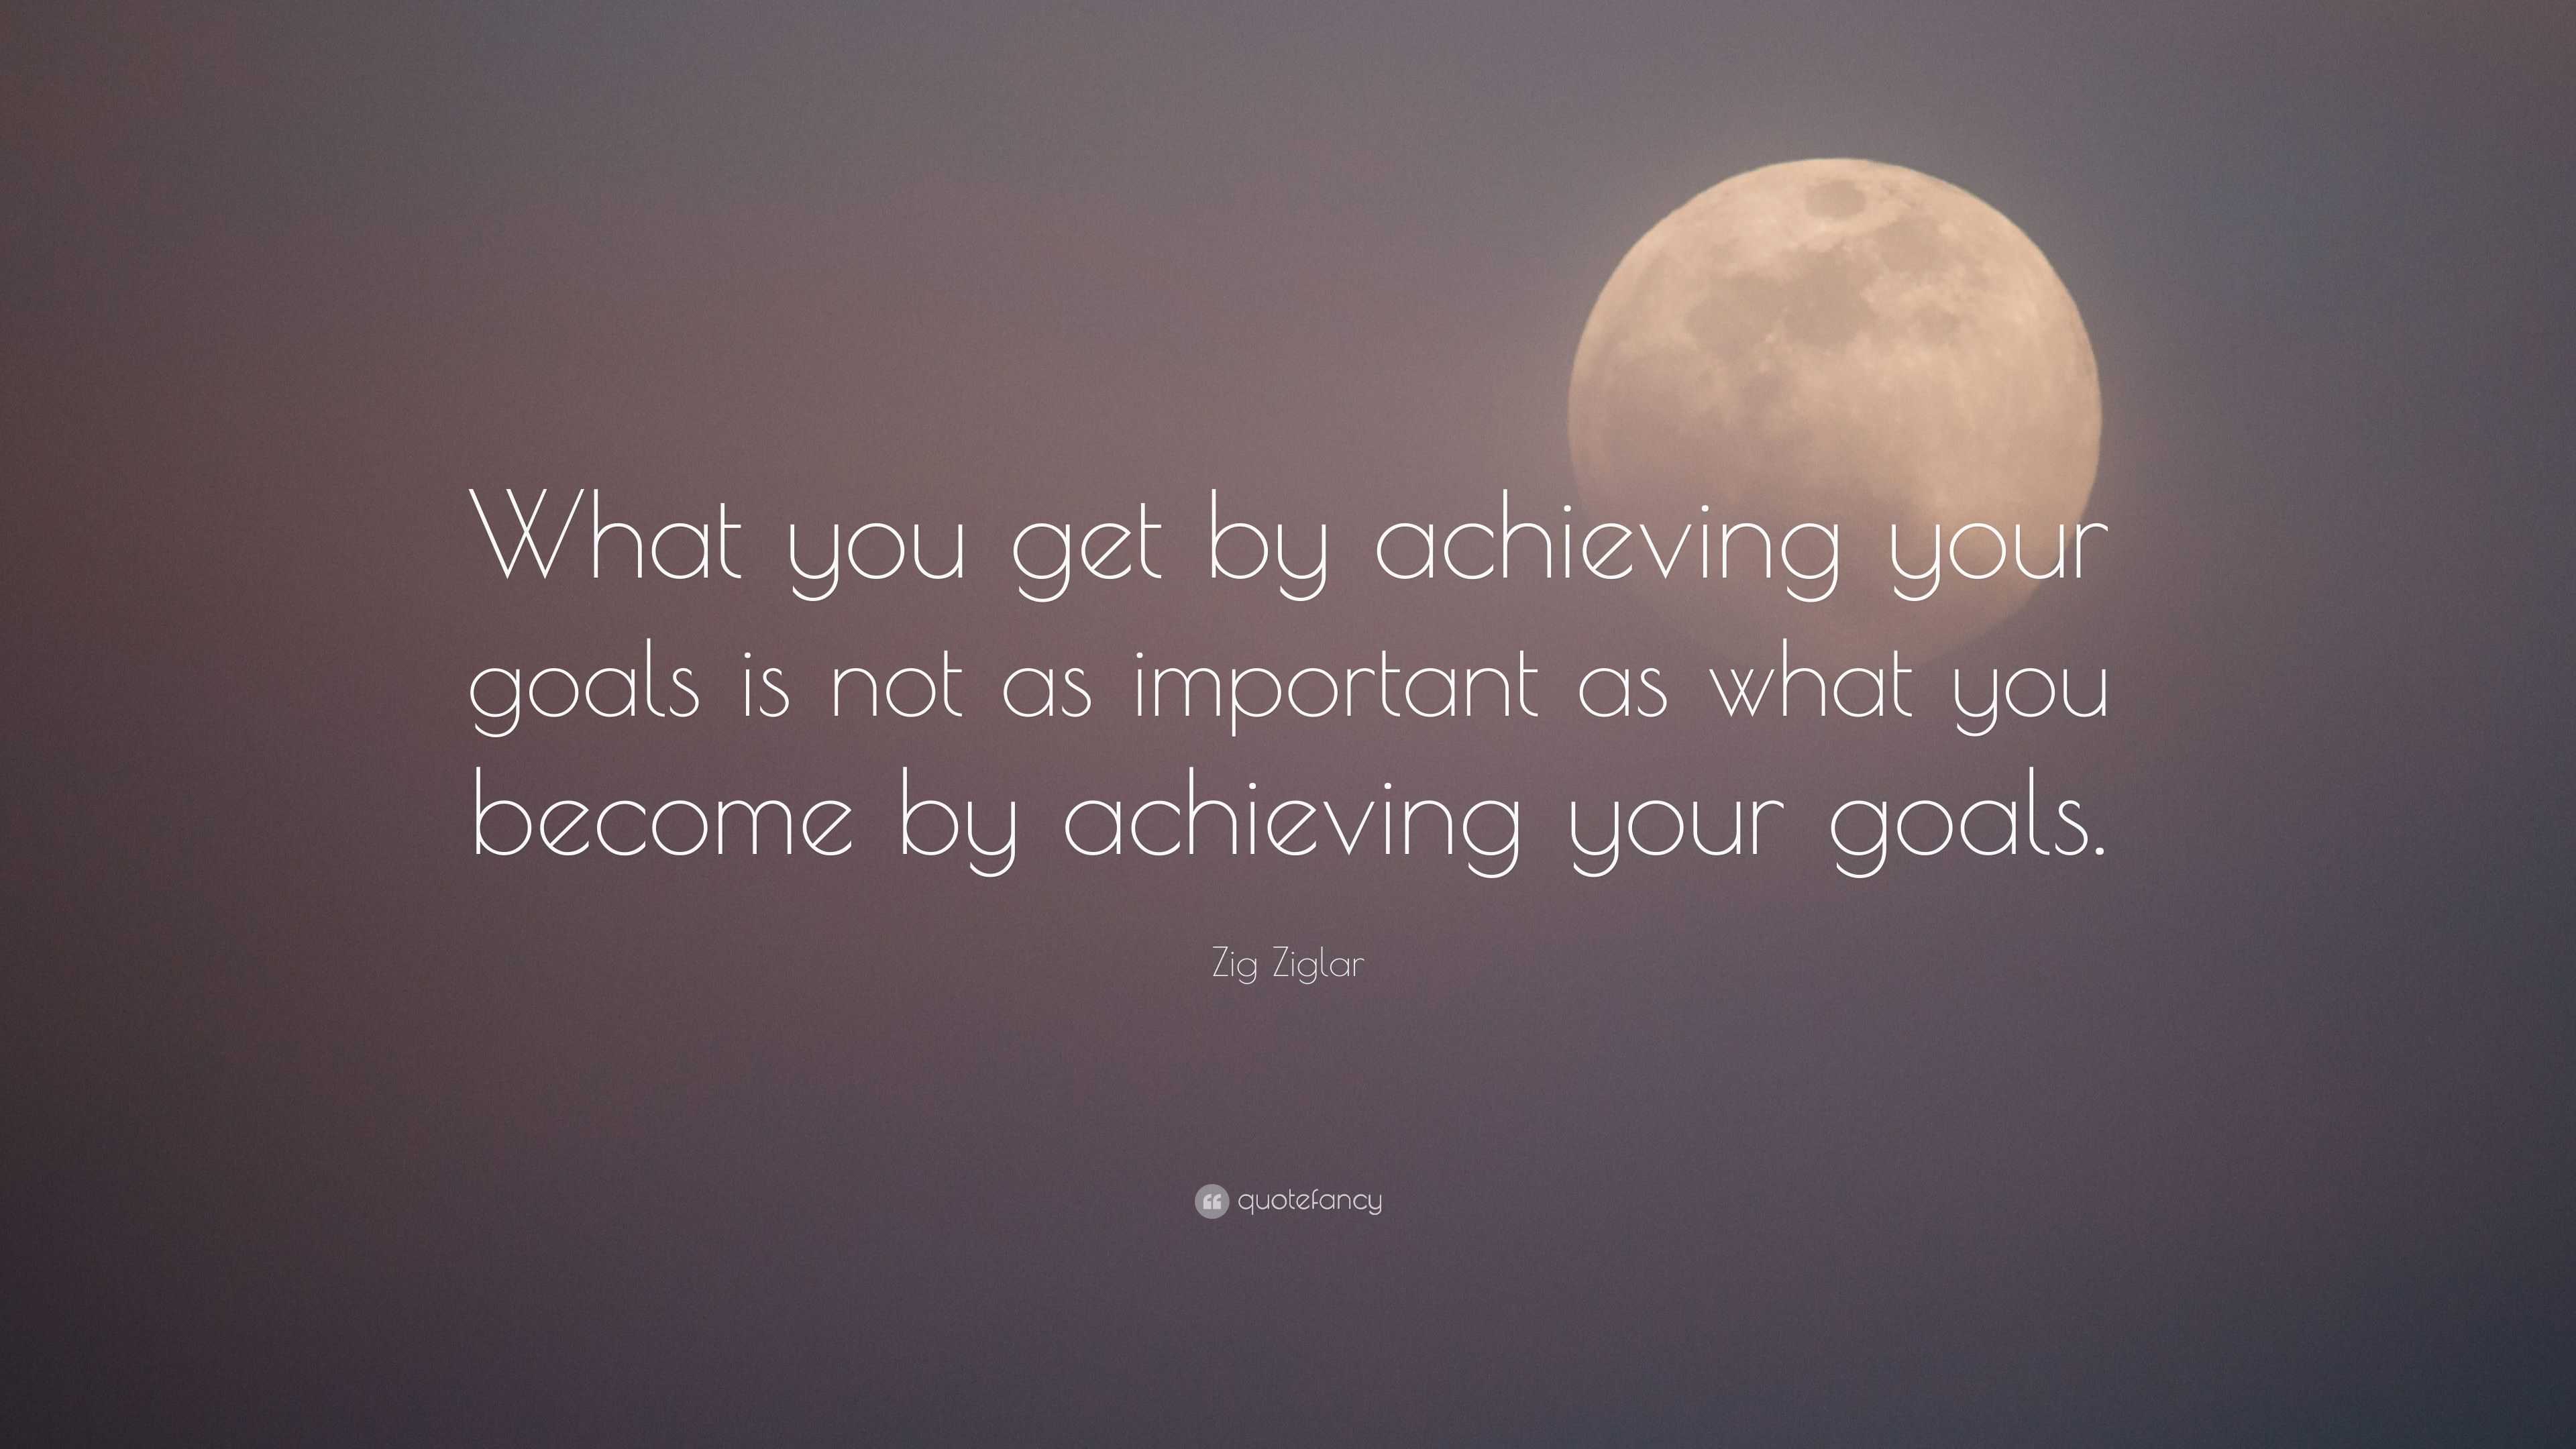 Zig Ziglar Quote: “What you get by achieving your goals is not as